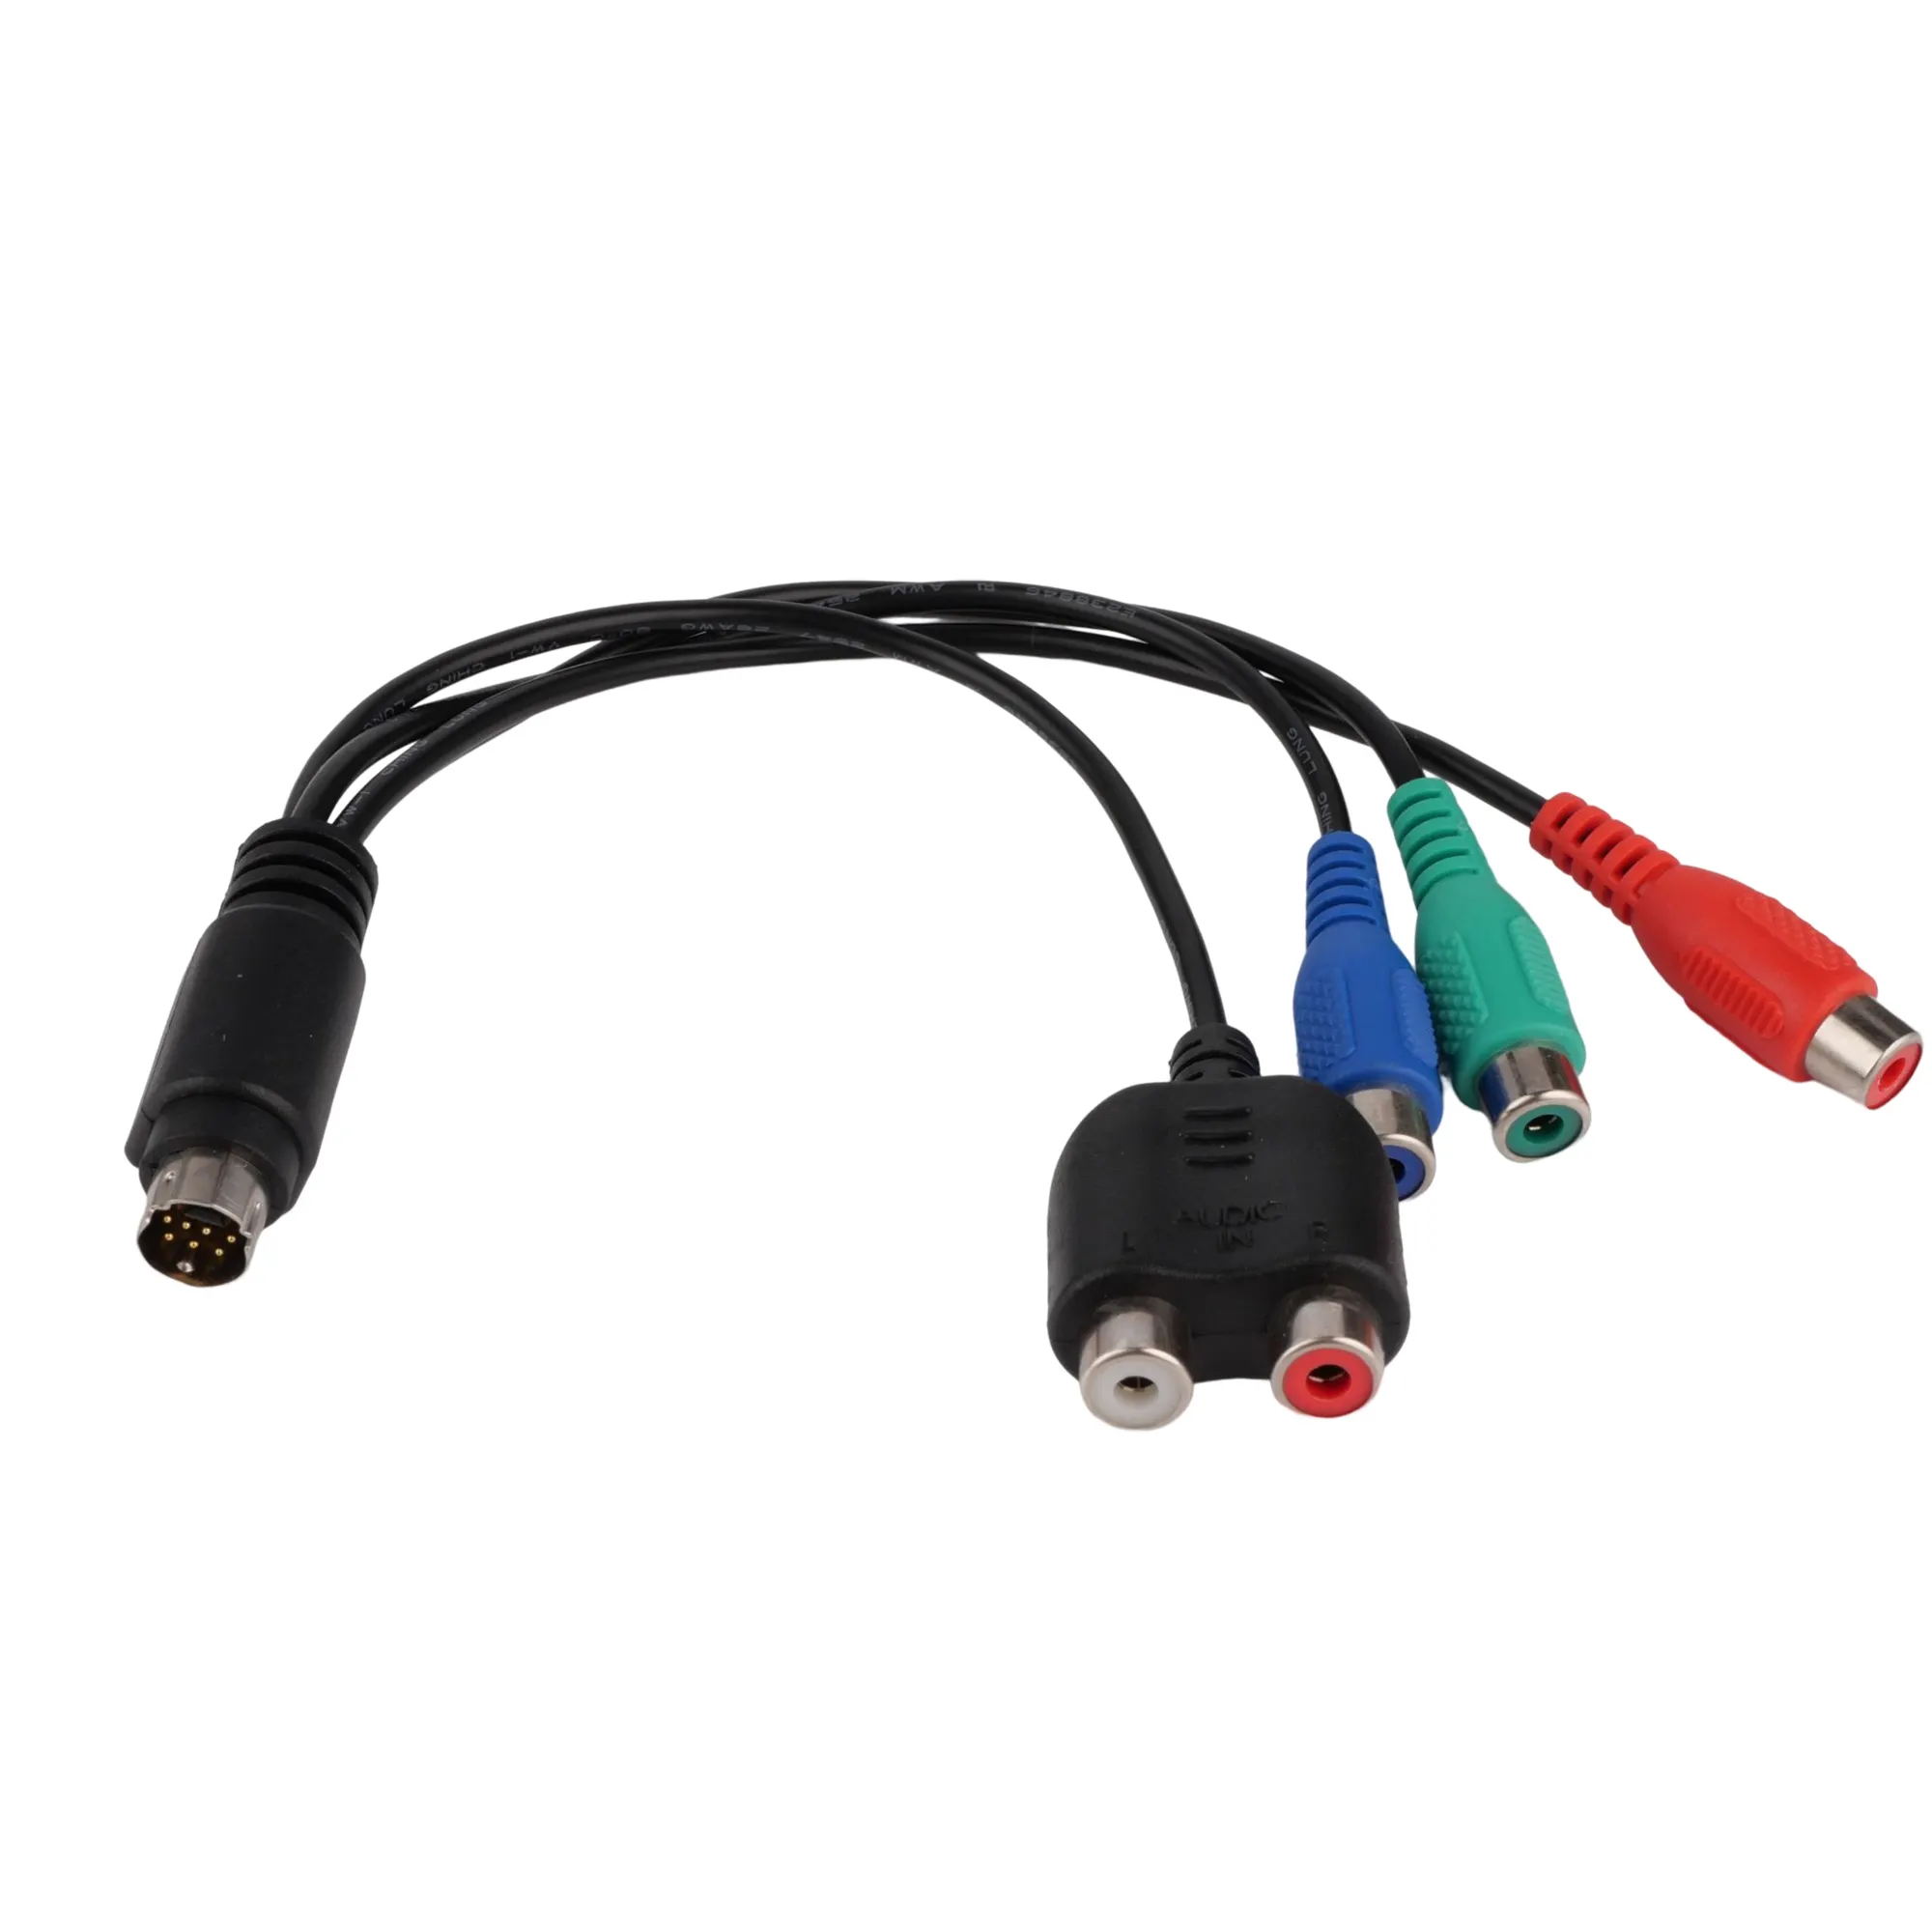 Specializing in 7 Pin S-Video to Female RGB/3 RCA and 4 pin S-Video Female Component Adapter Cable 20cm for PC DVD HDTV